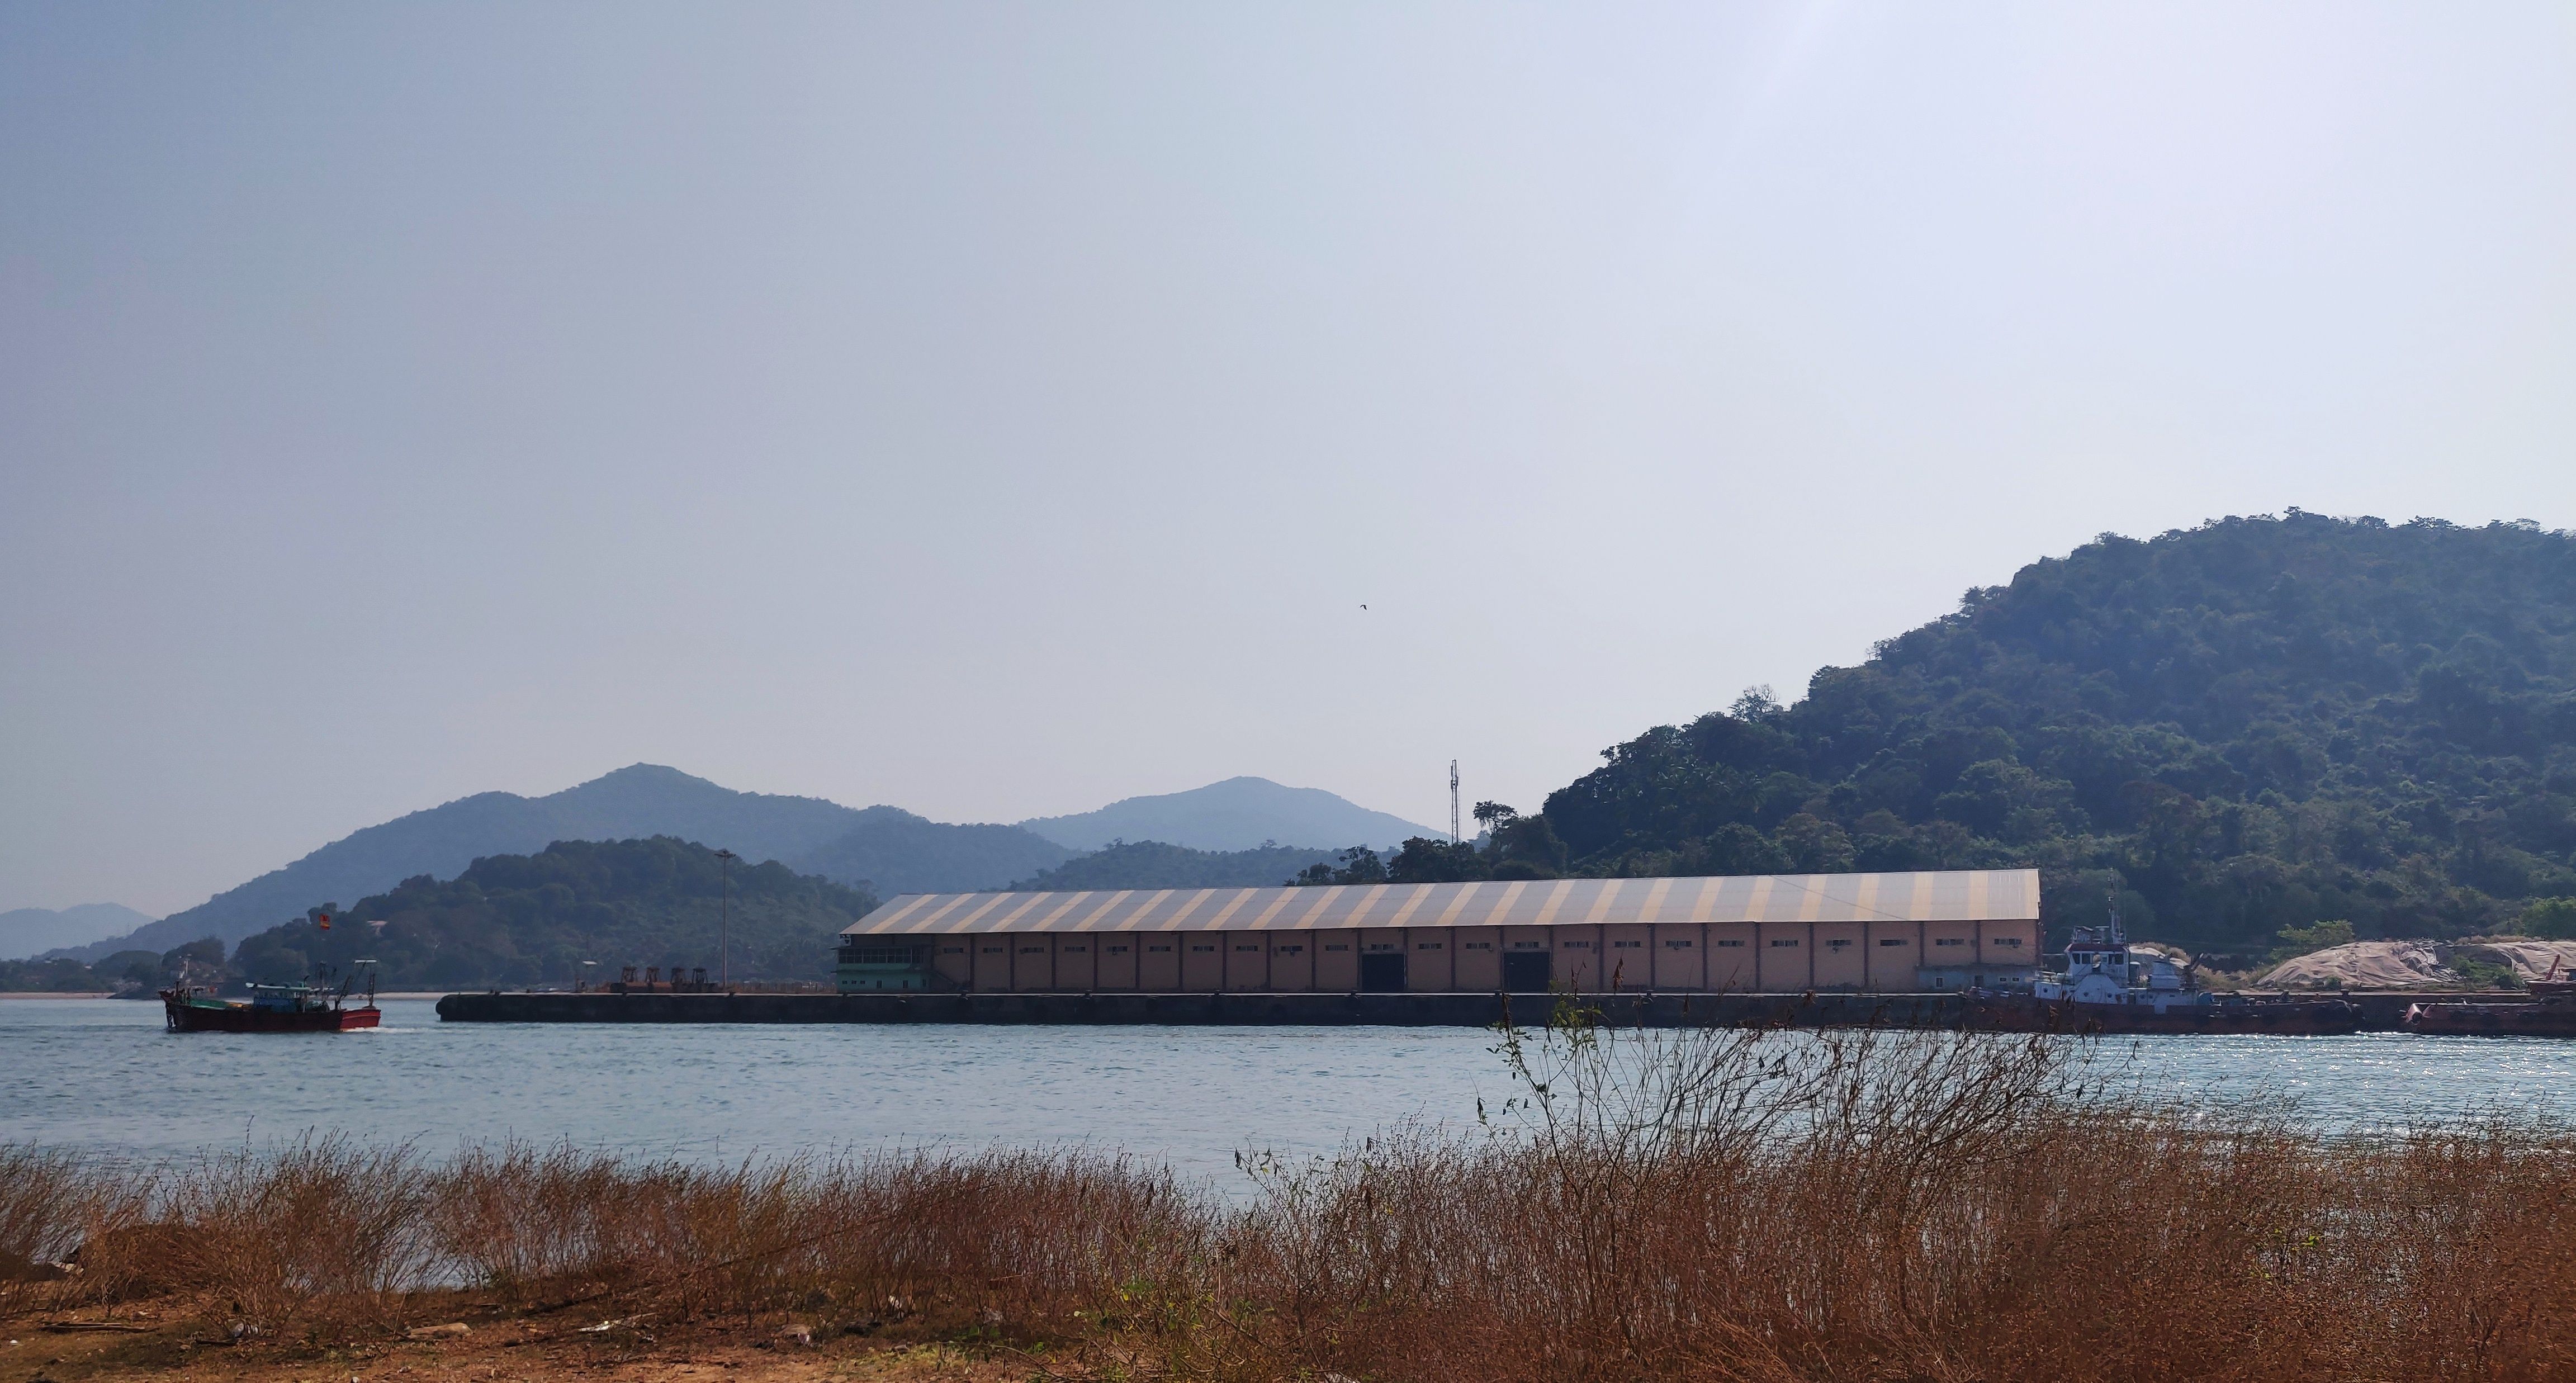 The Karwar port (pictured above) is at the southern end of the narrow beach. Apart from a new cargo terminal, new structures such as breakwaters on the beach and the expansion of roads leading to the port, are proposed to be built. These could severely disturb fishing activity in the area. Image by Disha Shetty / IndiaSpend. India, 2020.